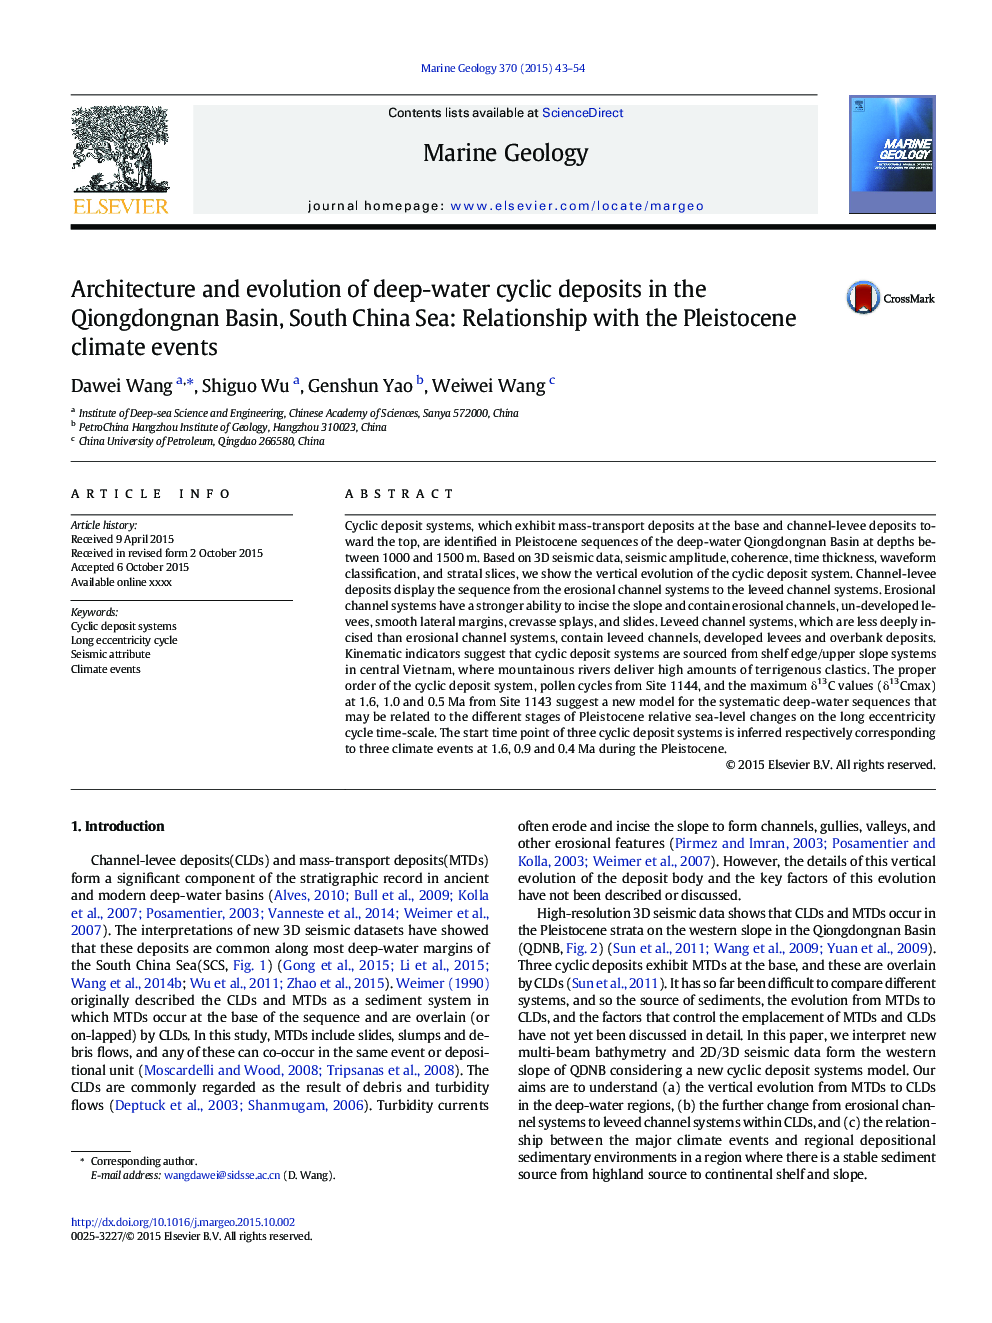 Architecture and evolution of deep-water cyclic deposits in the Qiongdongnan Basin, South China Sea: Relationship with the Pleistocene climate events